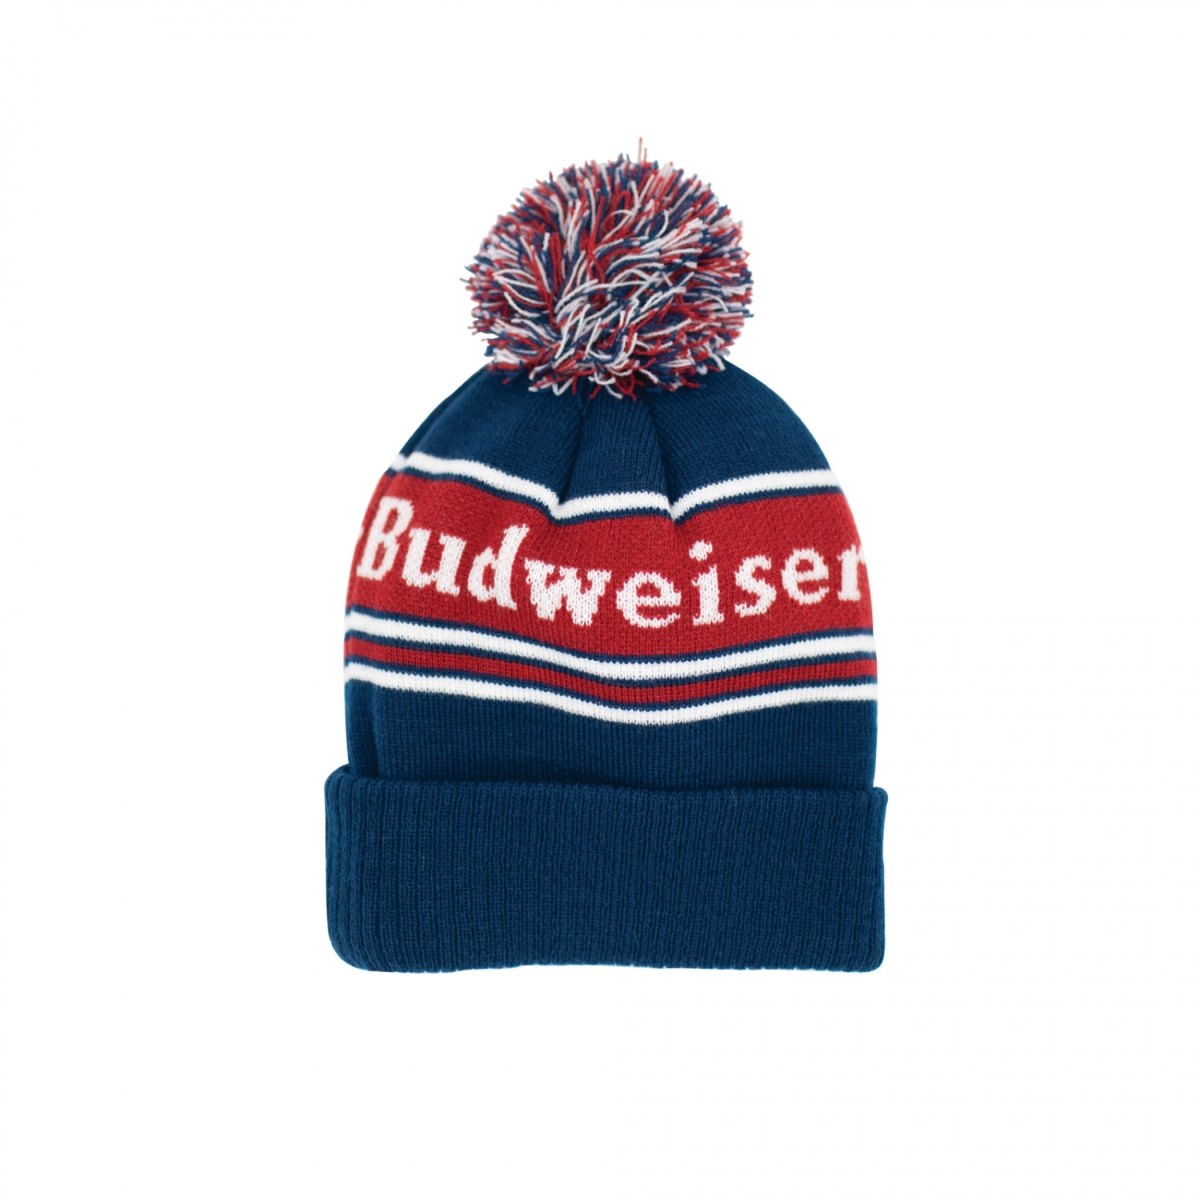 Picture of Budweiser 814175 Budweiser Label Text Patch Pom Knit Cuff Beanie